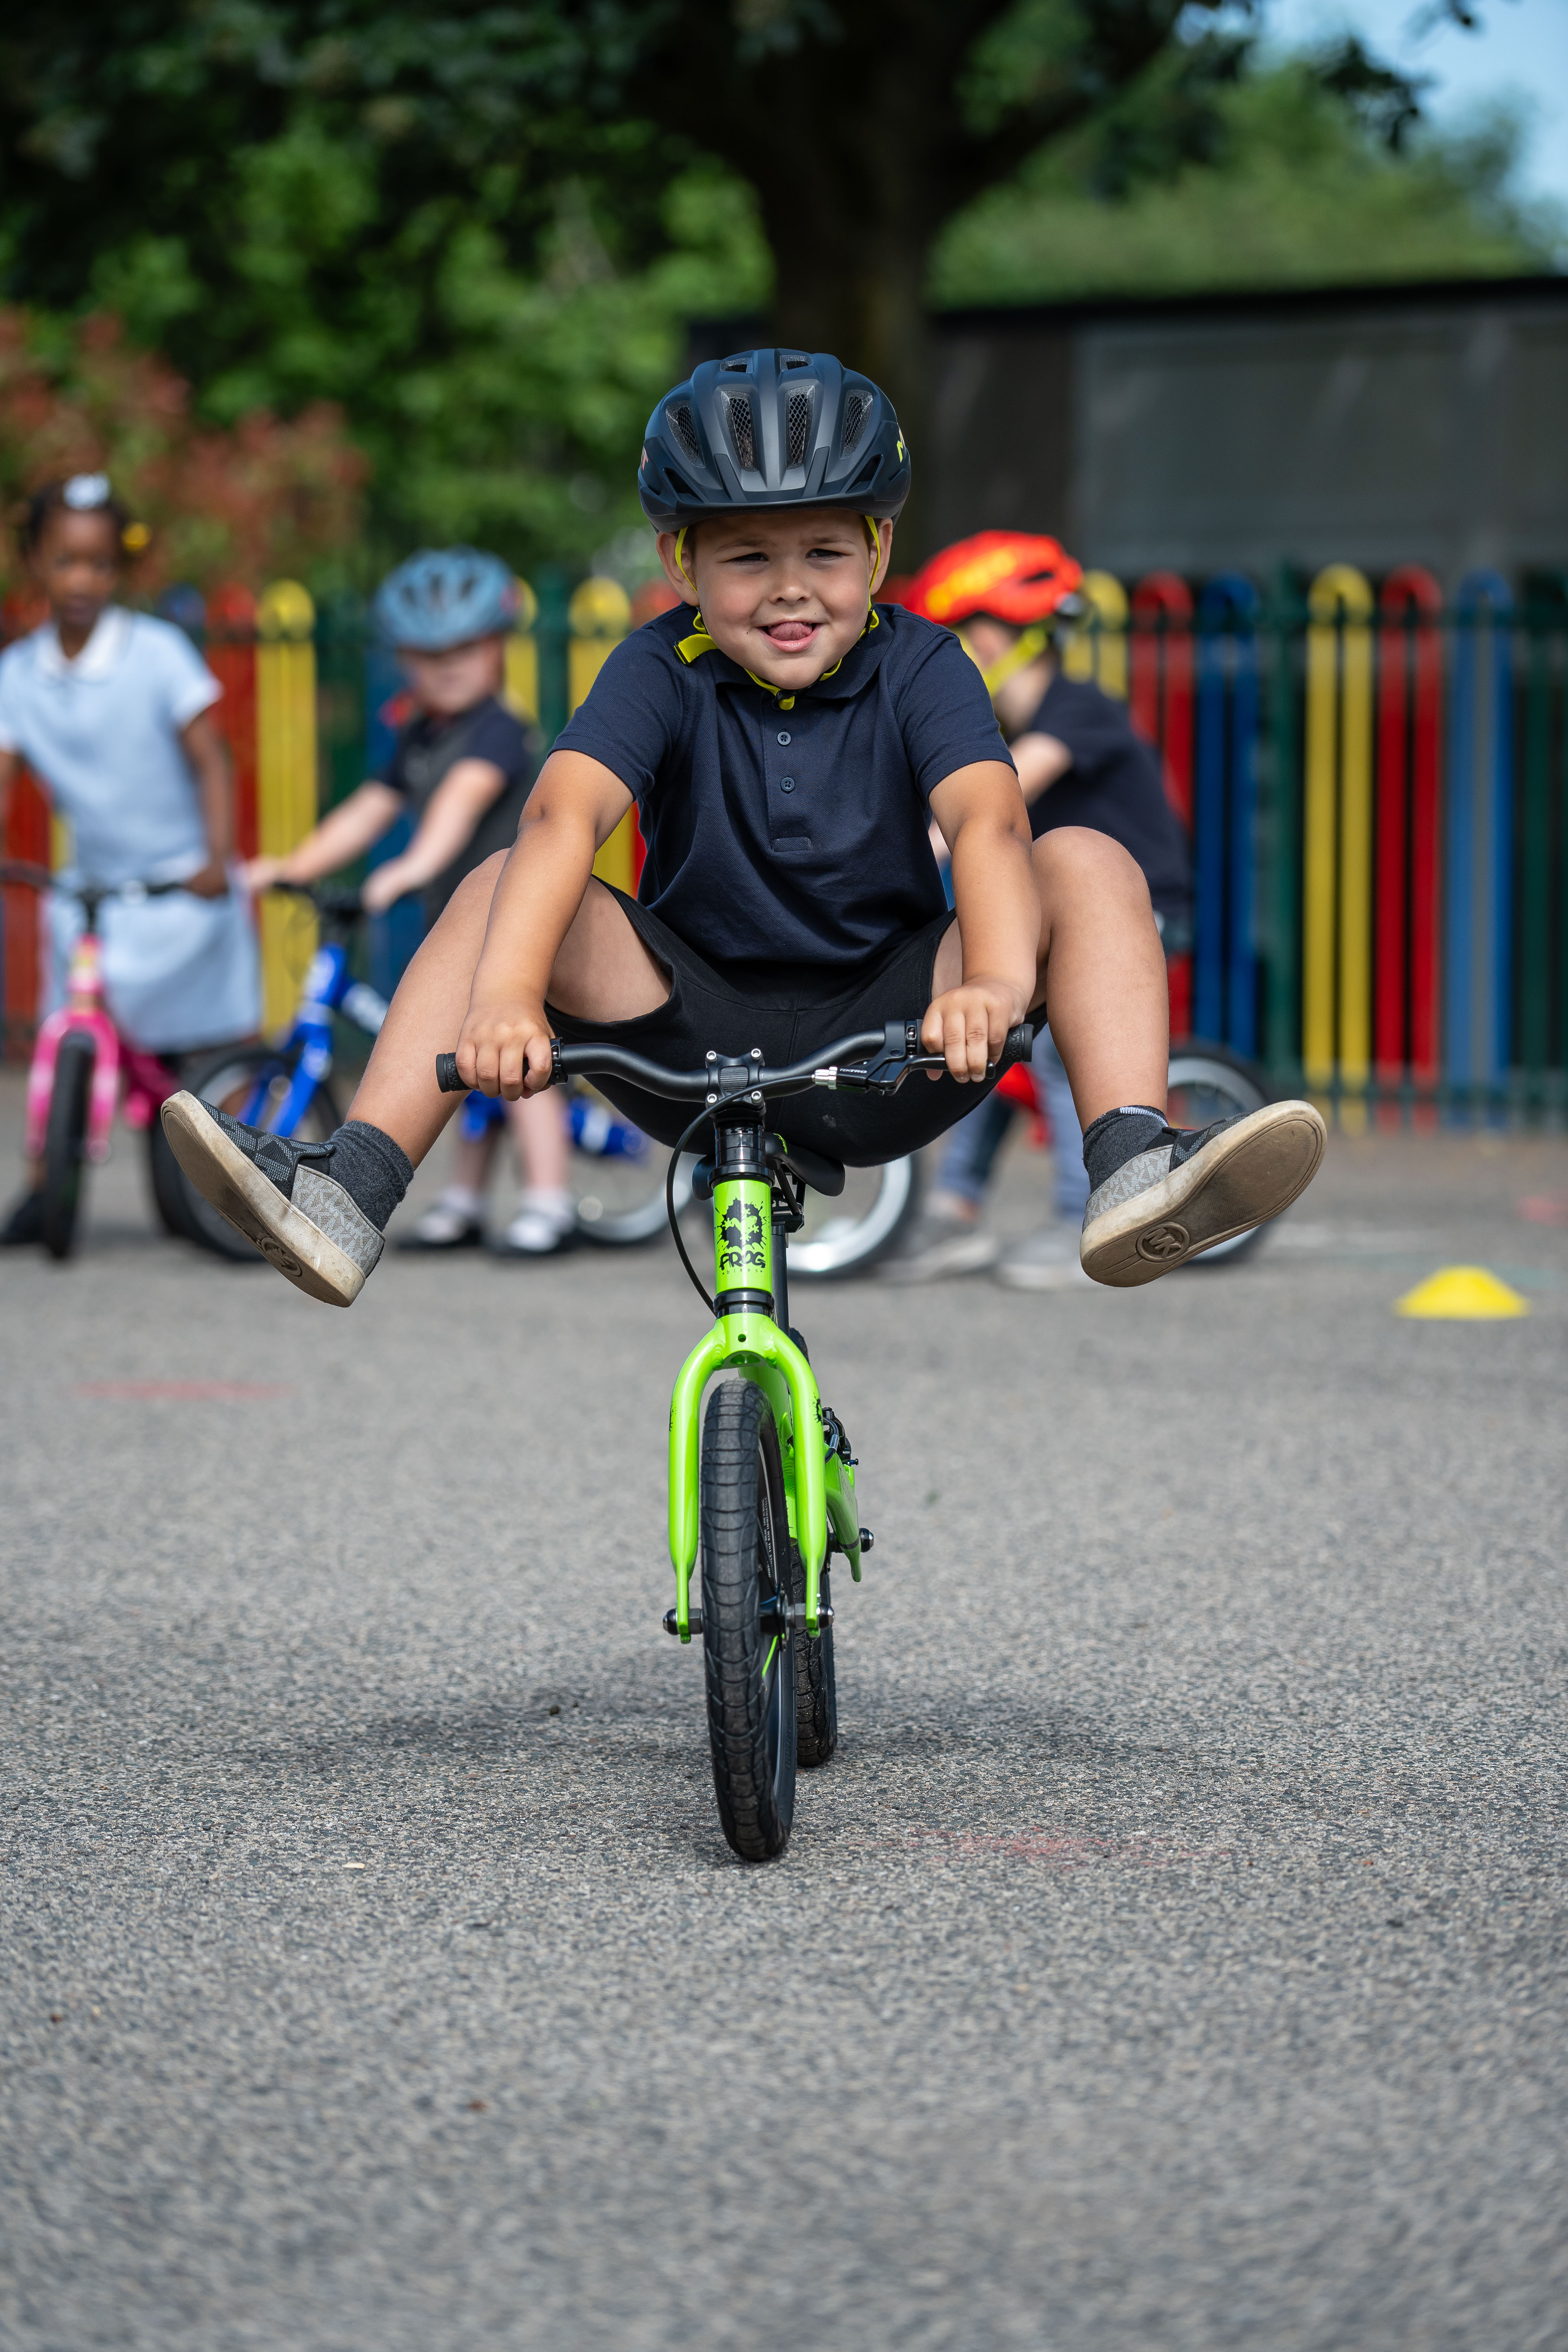 10,000+ children take their first LEAP into cycling with Bikeability and Frog Bikes